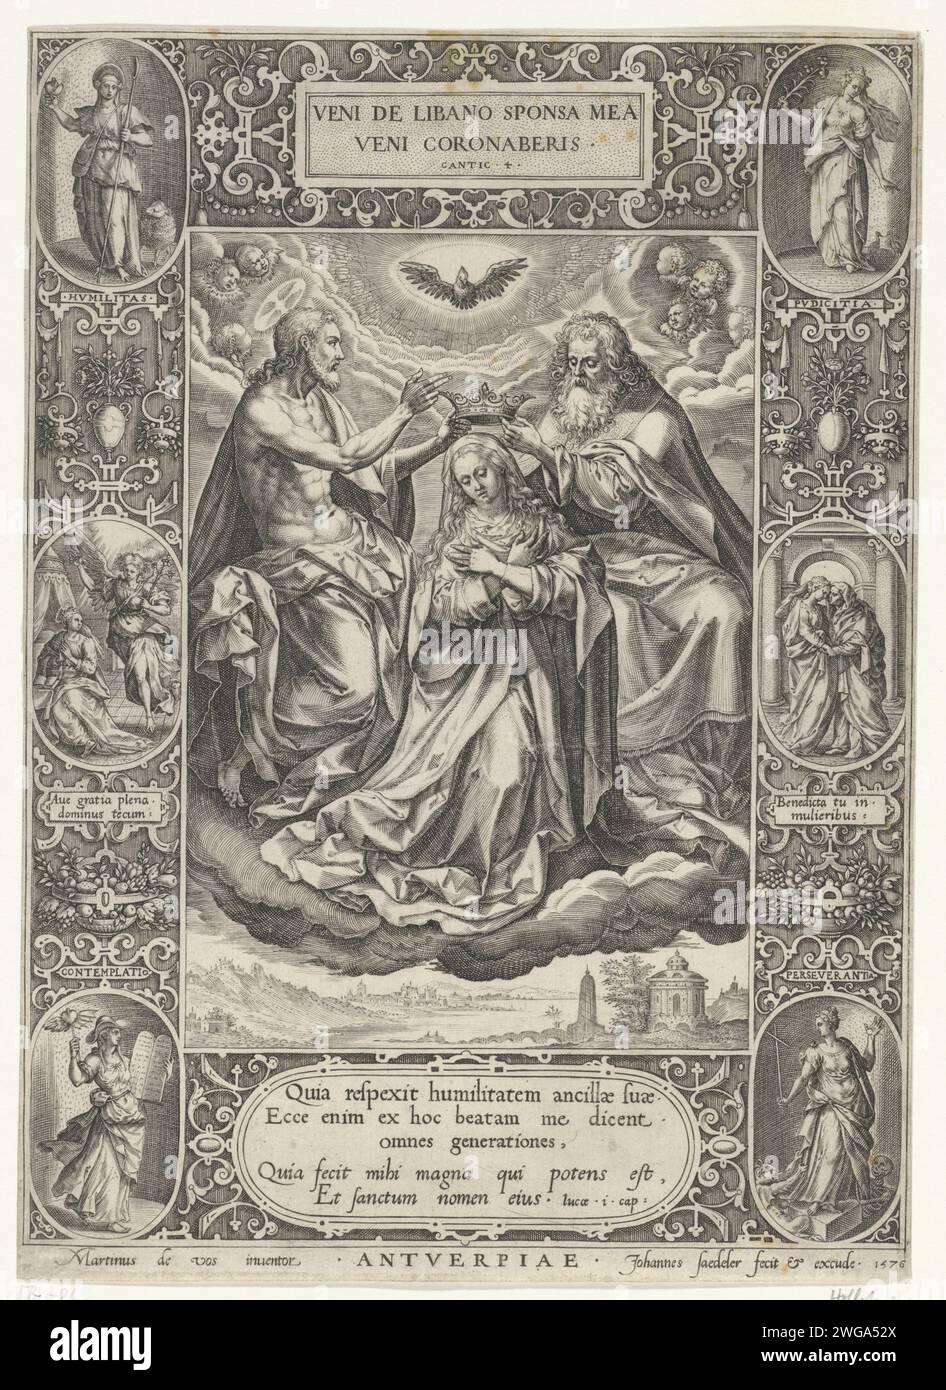 CREAT OF MARIA, Johann Sadeler (I), After Maerten de Vos, 1576 print The coronation of Maria in the clouds. God the Father and Christ keep the crown over her head. In the middle the Holy Spirit as a pigeon. In ornamental accompaniment with 6 ovals in which the four characteristics of Maria: humility (humilitas), chastity (Pudicitia), thoughtfulness (contemplatio) and perseverance (Persverantia) and two scenes from the life of Maria: the annunciation and the visitation. Antwerp paper engraving coronation of Mary in heaven (usually the Holy Trinity present). the Holy Trinity, 'Trinitas coelestis Stock Photo